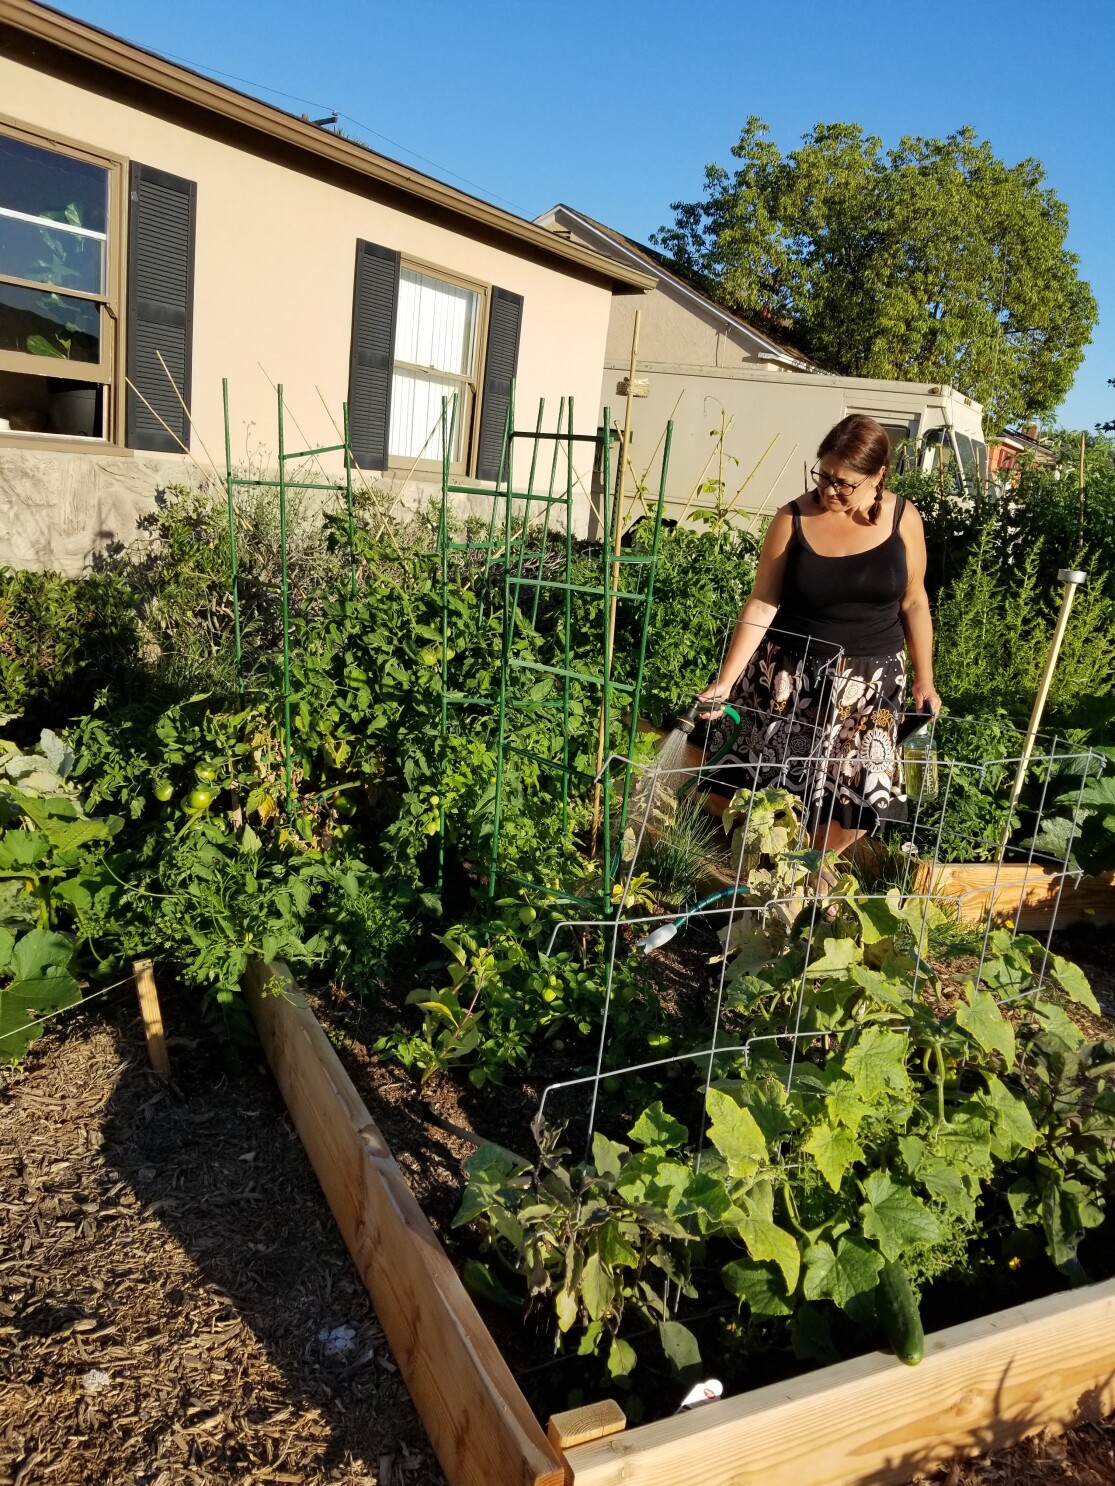 Three Gardeners Find Purpose In Growing Their Own Produce During Pandemic The San Diego Union Tribune